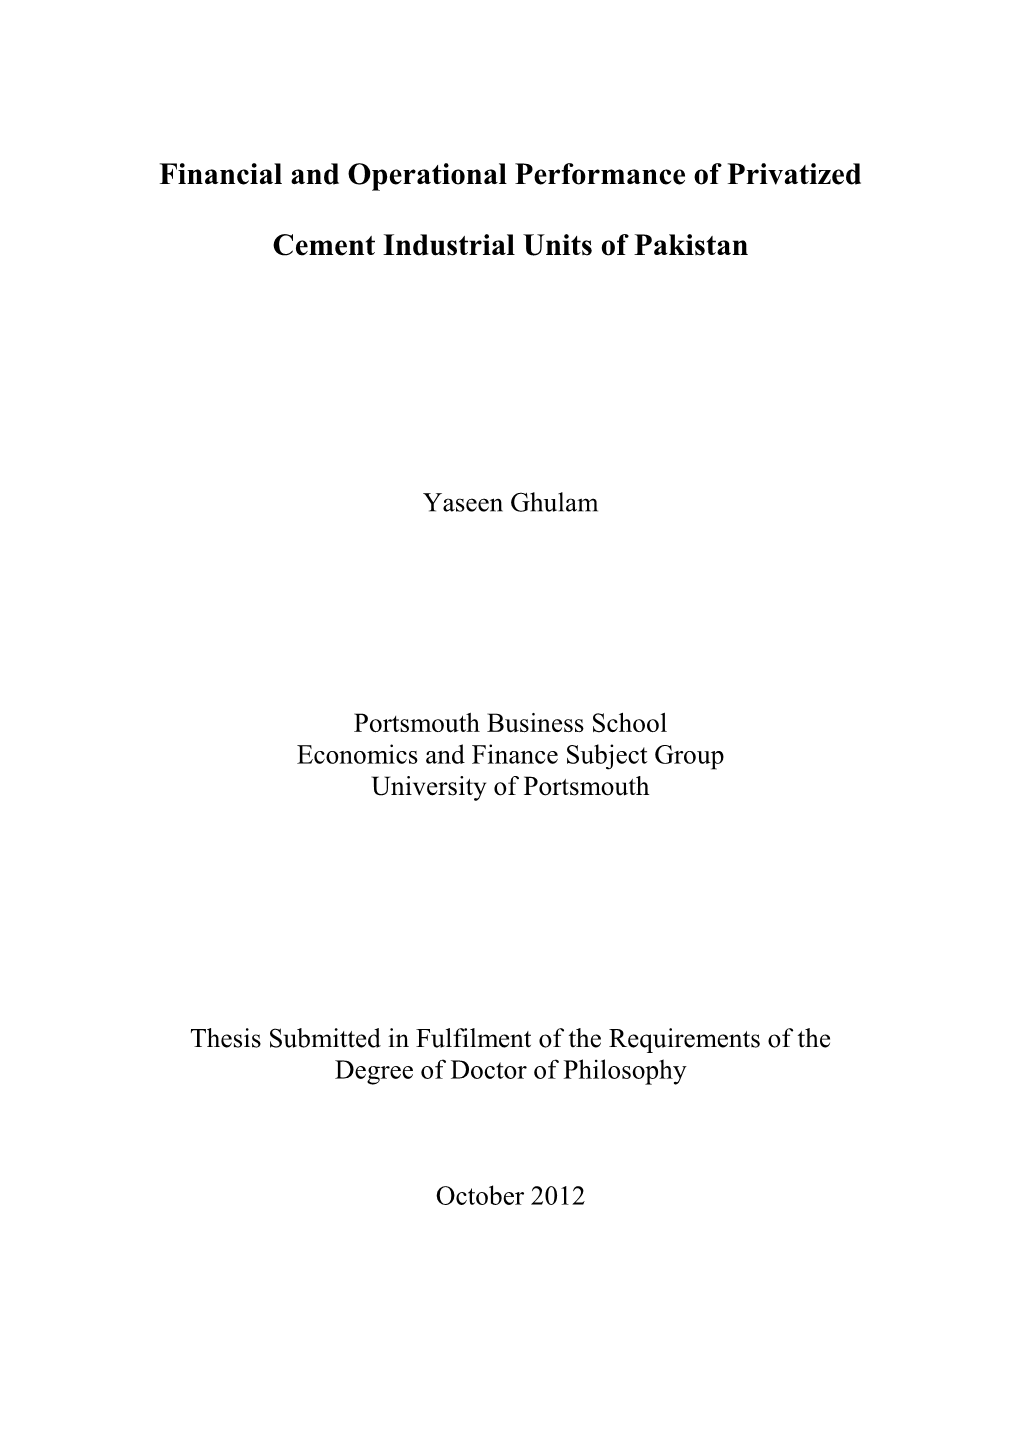 Financial and Operational Performance of Privatized Cement Industrial Units of Pakistan